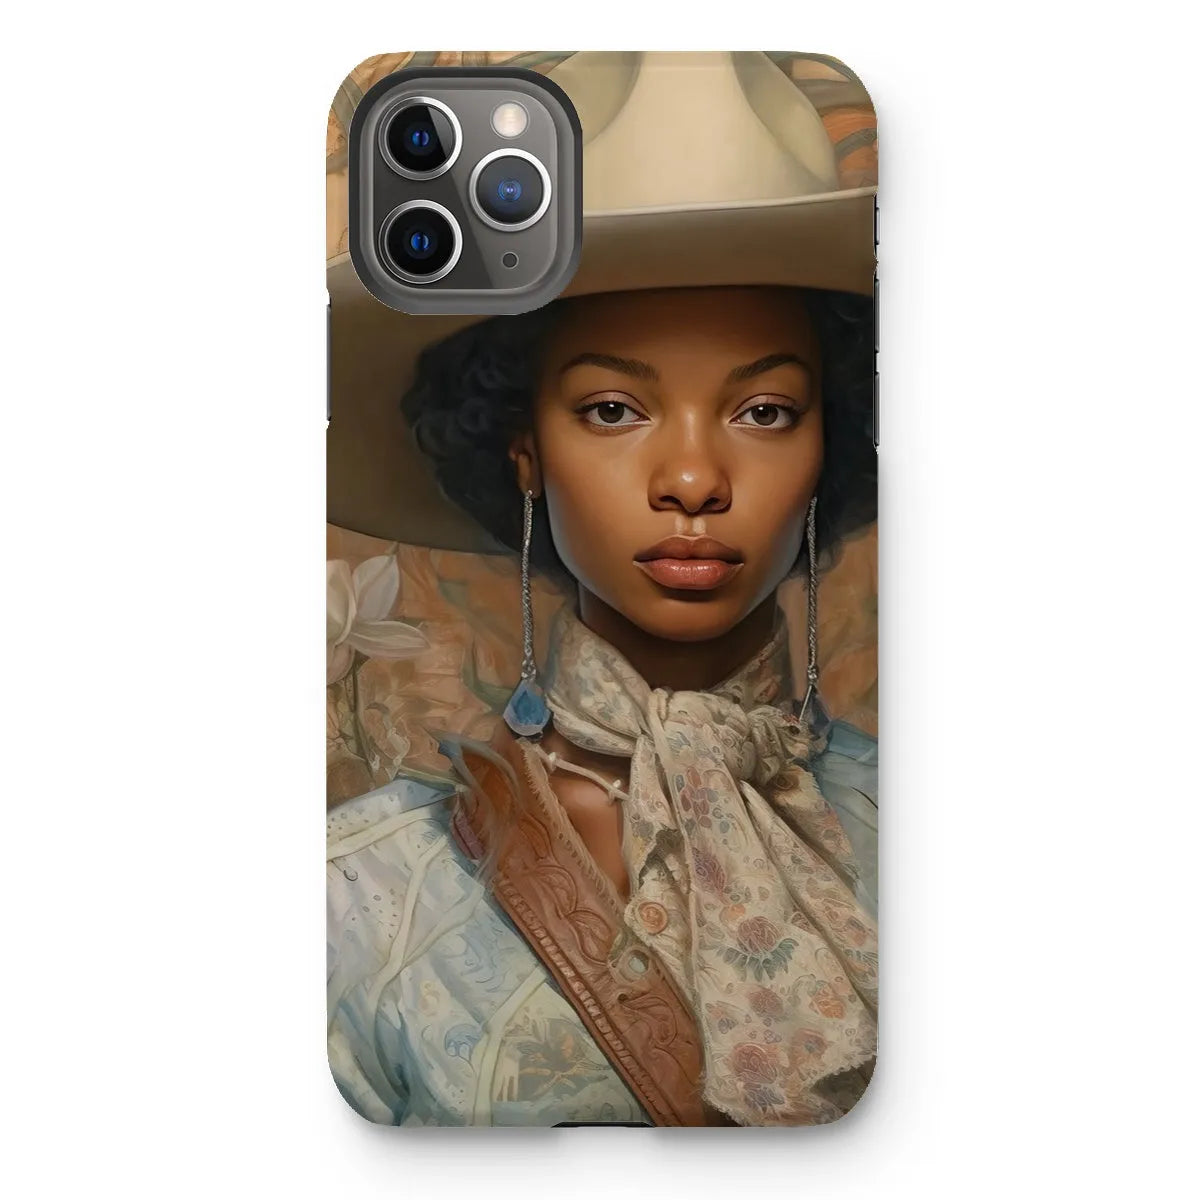 Imani The Lesbian Cowgirl - Sapphic Art Phone Case - Iphone 11 Pro Max / Matte - Mobile Phone Cases - Aesthetic Art